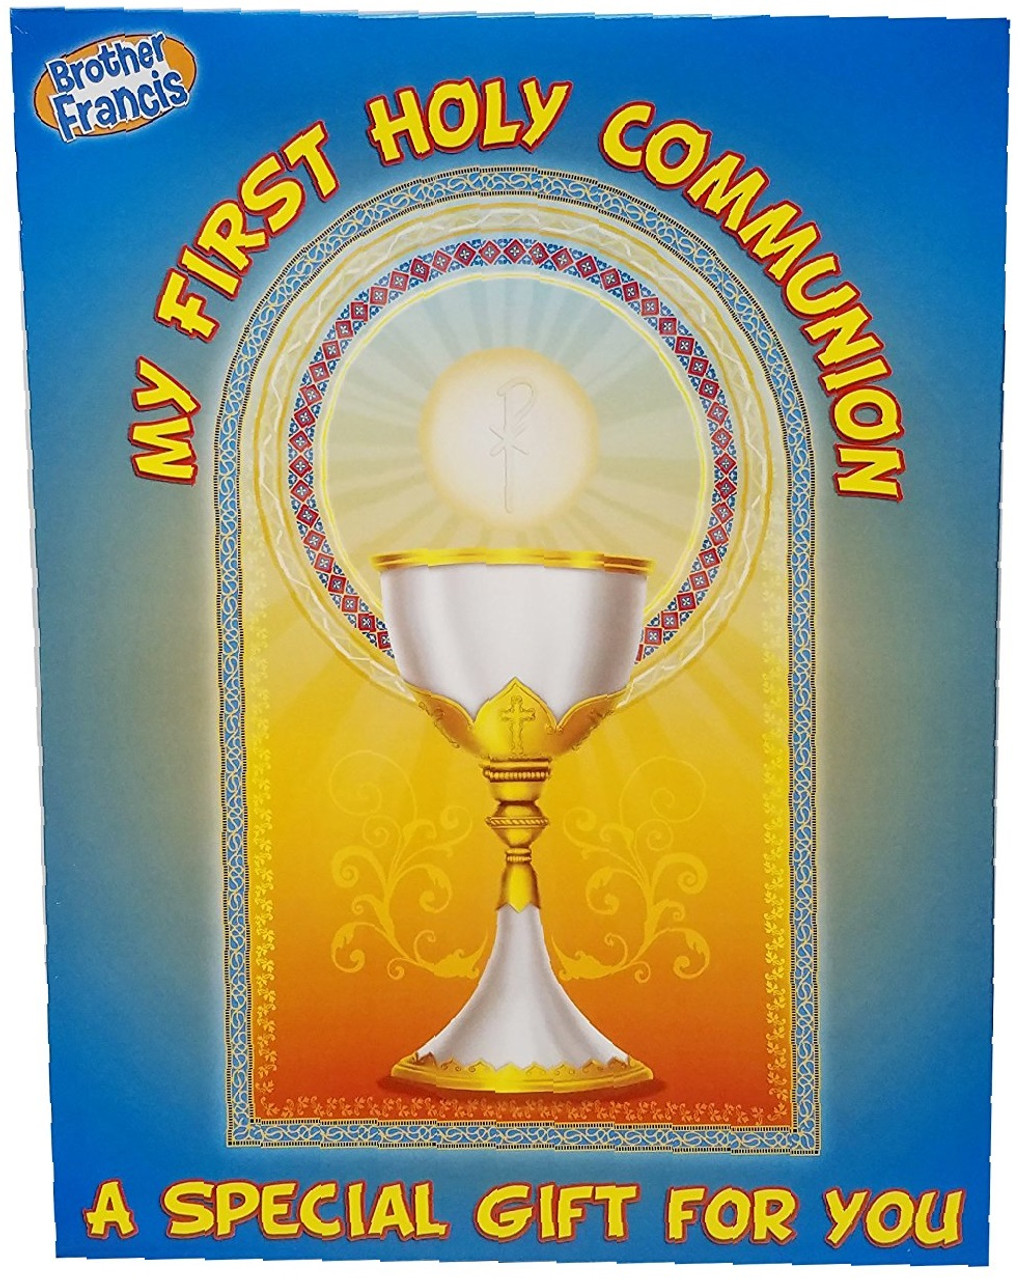 Brother Francis - First Holy Communion Gift Set